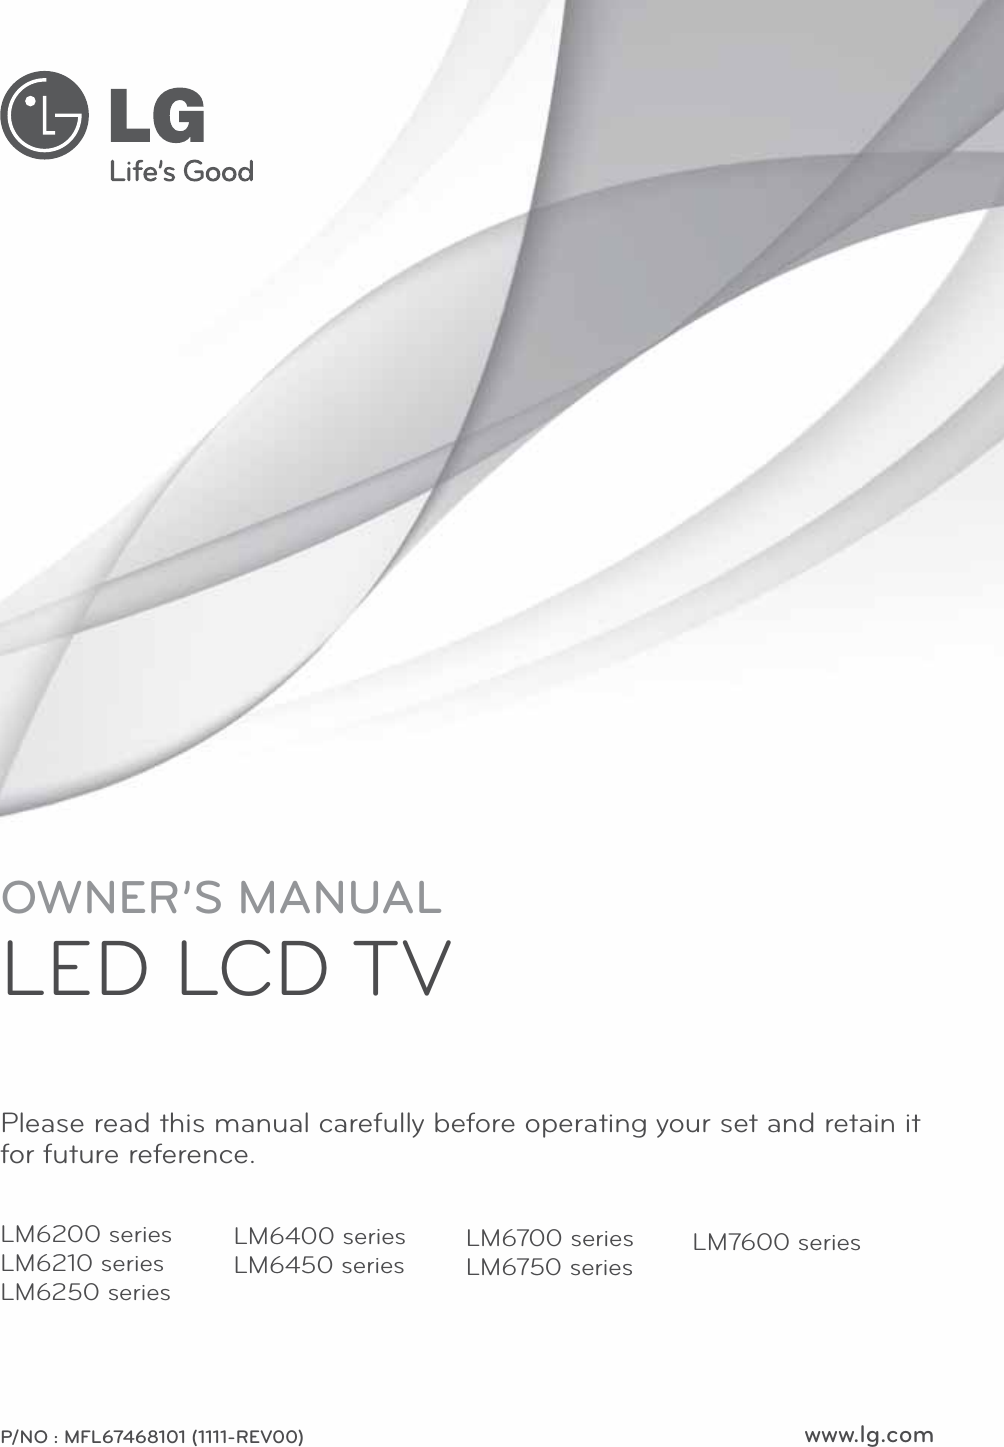 www.lg.comOWNER’S MANUALLED LCD TVPlease read this manual carefully before operating your set and retain it for future reference.P/NO : MFL67468101 (1111-REV00)LM6200 seriesLM6210 seriesLM6250 seriesLM7600 seriesLM6400 seriesLM6450 seriesLM6700 seriesLM6750 series